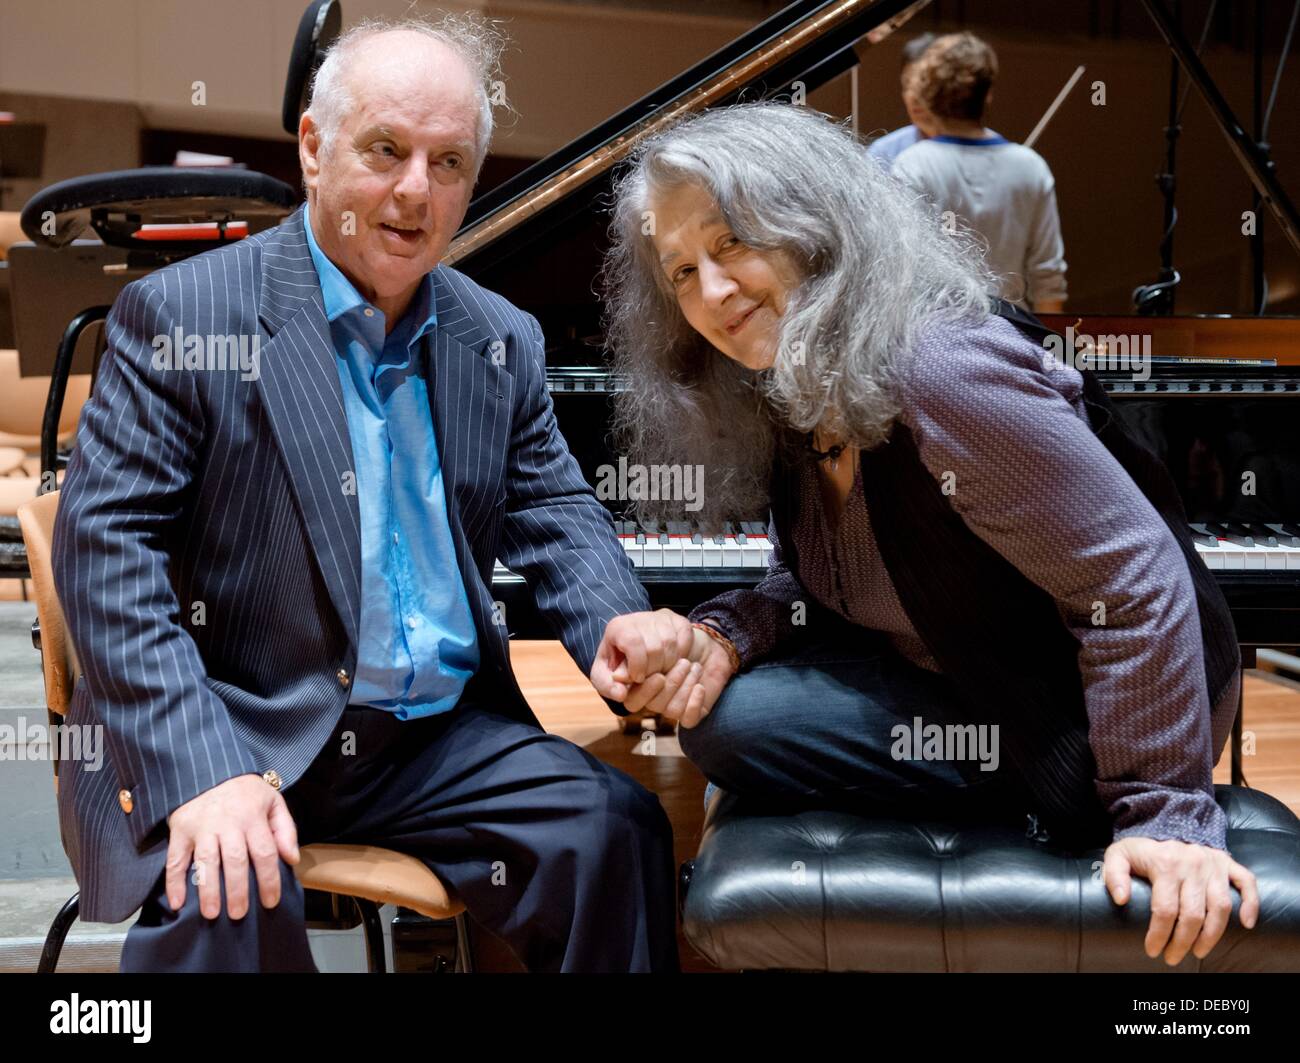 Berlin, Germany. 14th Sep, 2013. Director Daniel Barenboim and the Argetinian piano player, Martha Argerich, talk to each other after a rehearsal in the philharmonic hall of Berlin, Germany, 14 September 2013. Photo: SOEREN STACHE/dpa/Alamy Live News Stock Photo